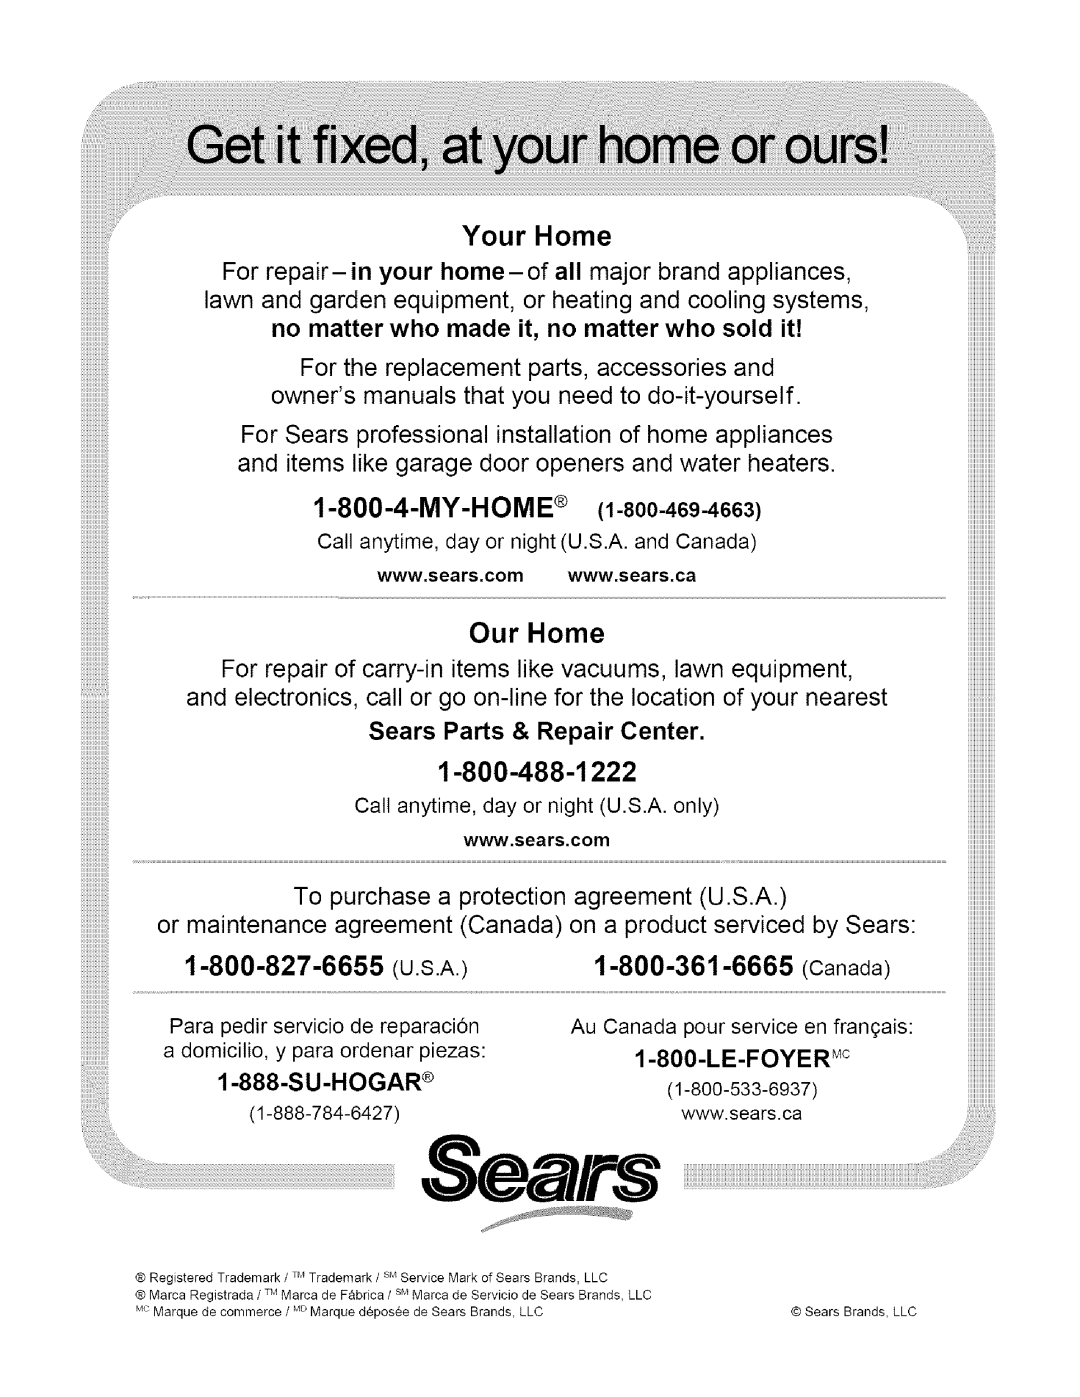 Craftsman 486.24441 operating instructions 1-8oo-488-1222, Your Home, Our Home, Canada, My-H, Sears Parts & Repair Center 